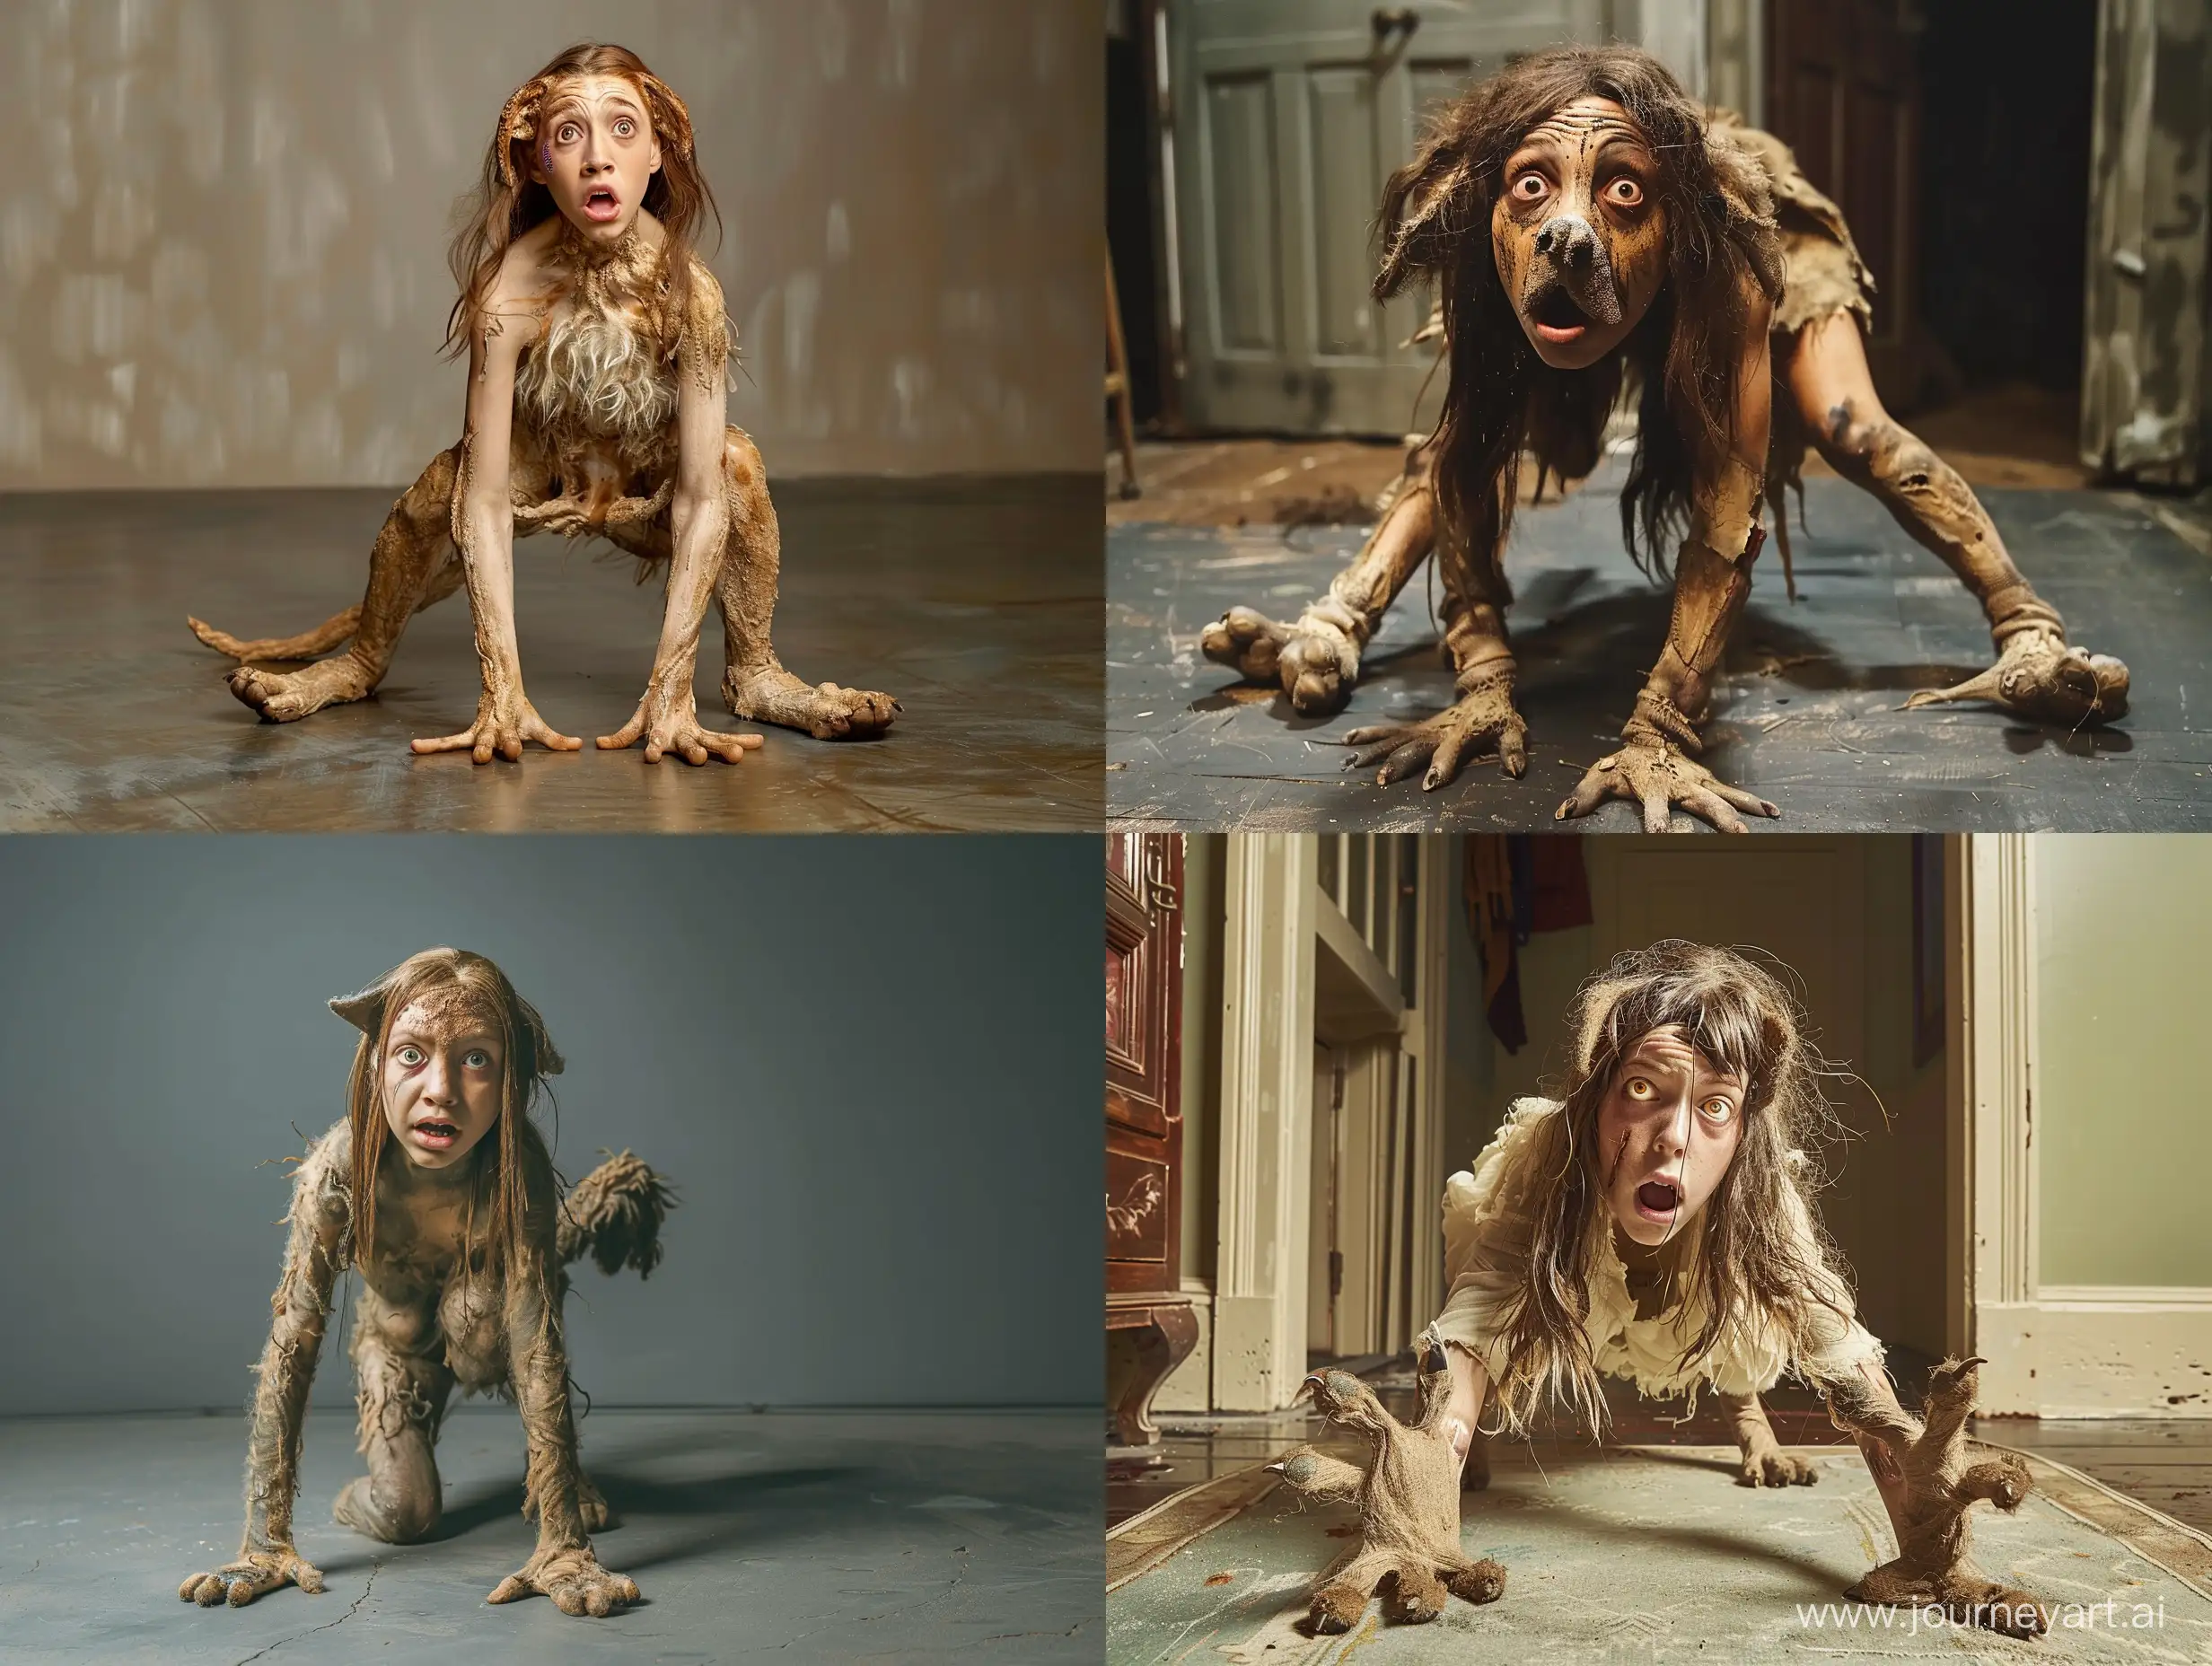 A photograph of a young woman who has been transformed into a dog due to a magic spell. She has paws, a snout, fur and a tail. She has no human features left. She is standing on all fours on the floor with a scared expression. Full body picture